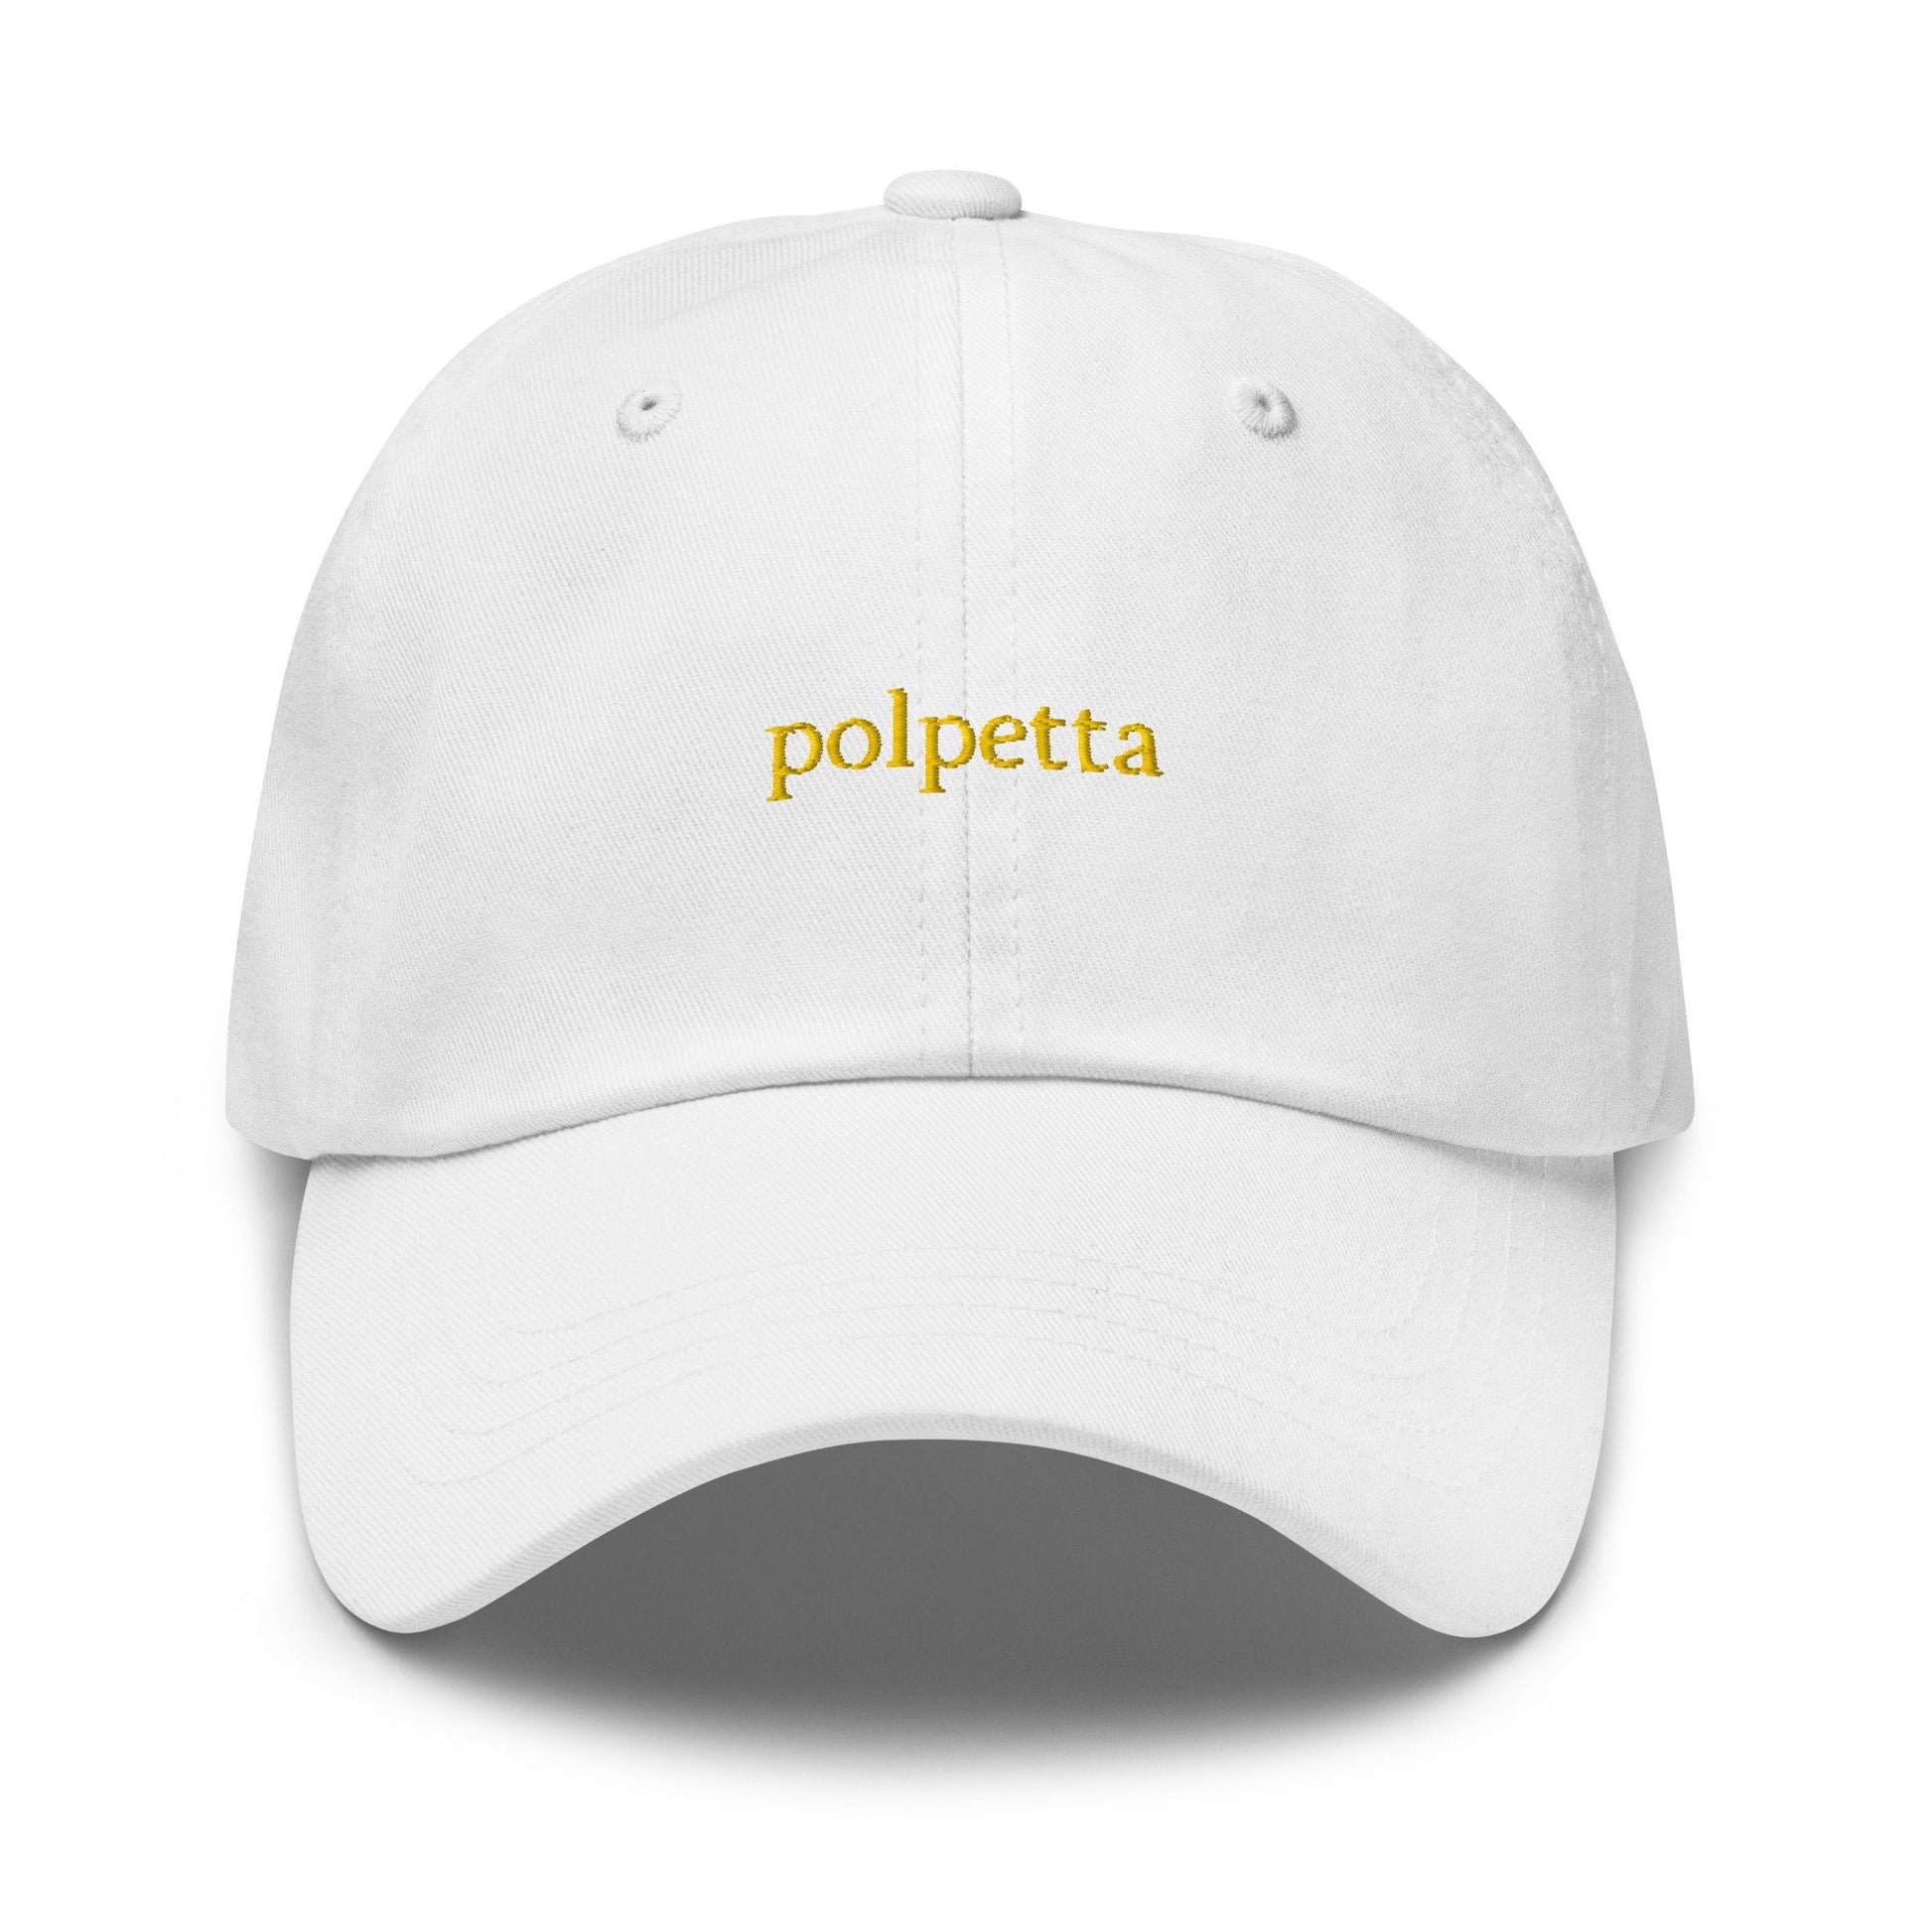 Polpetta Dad Hat - Gift for Italian food lovers - Meatball Fans - Cotton embroidered Cap